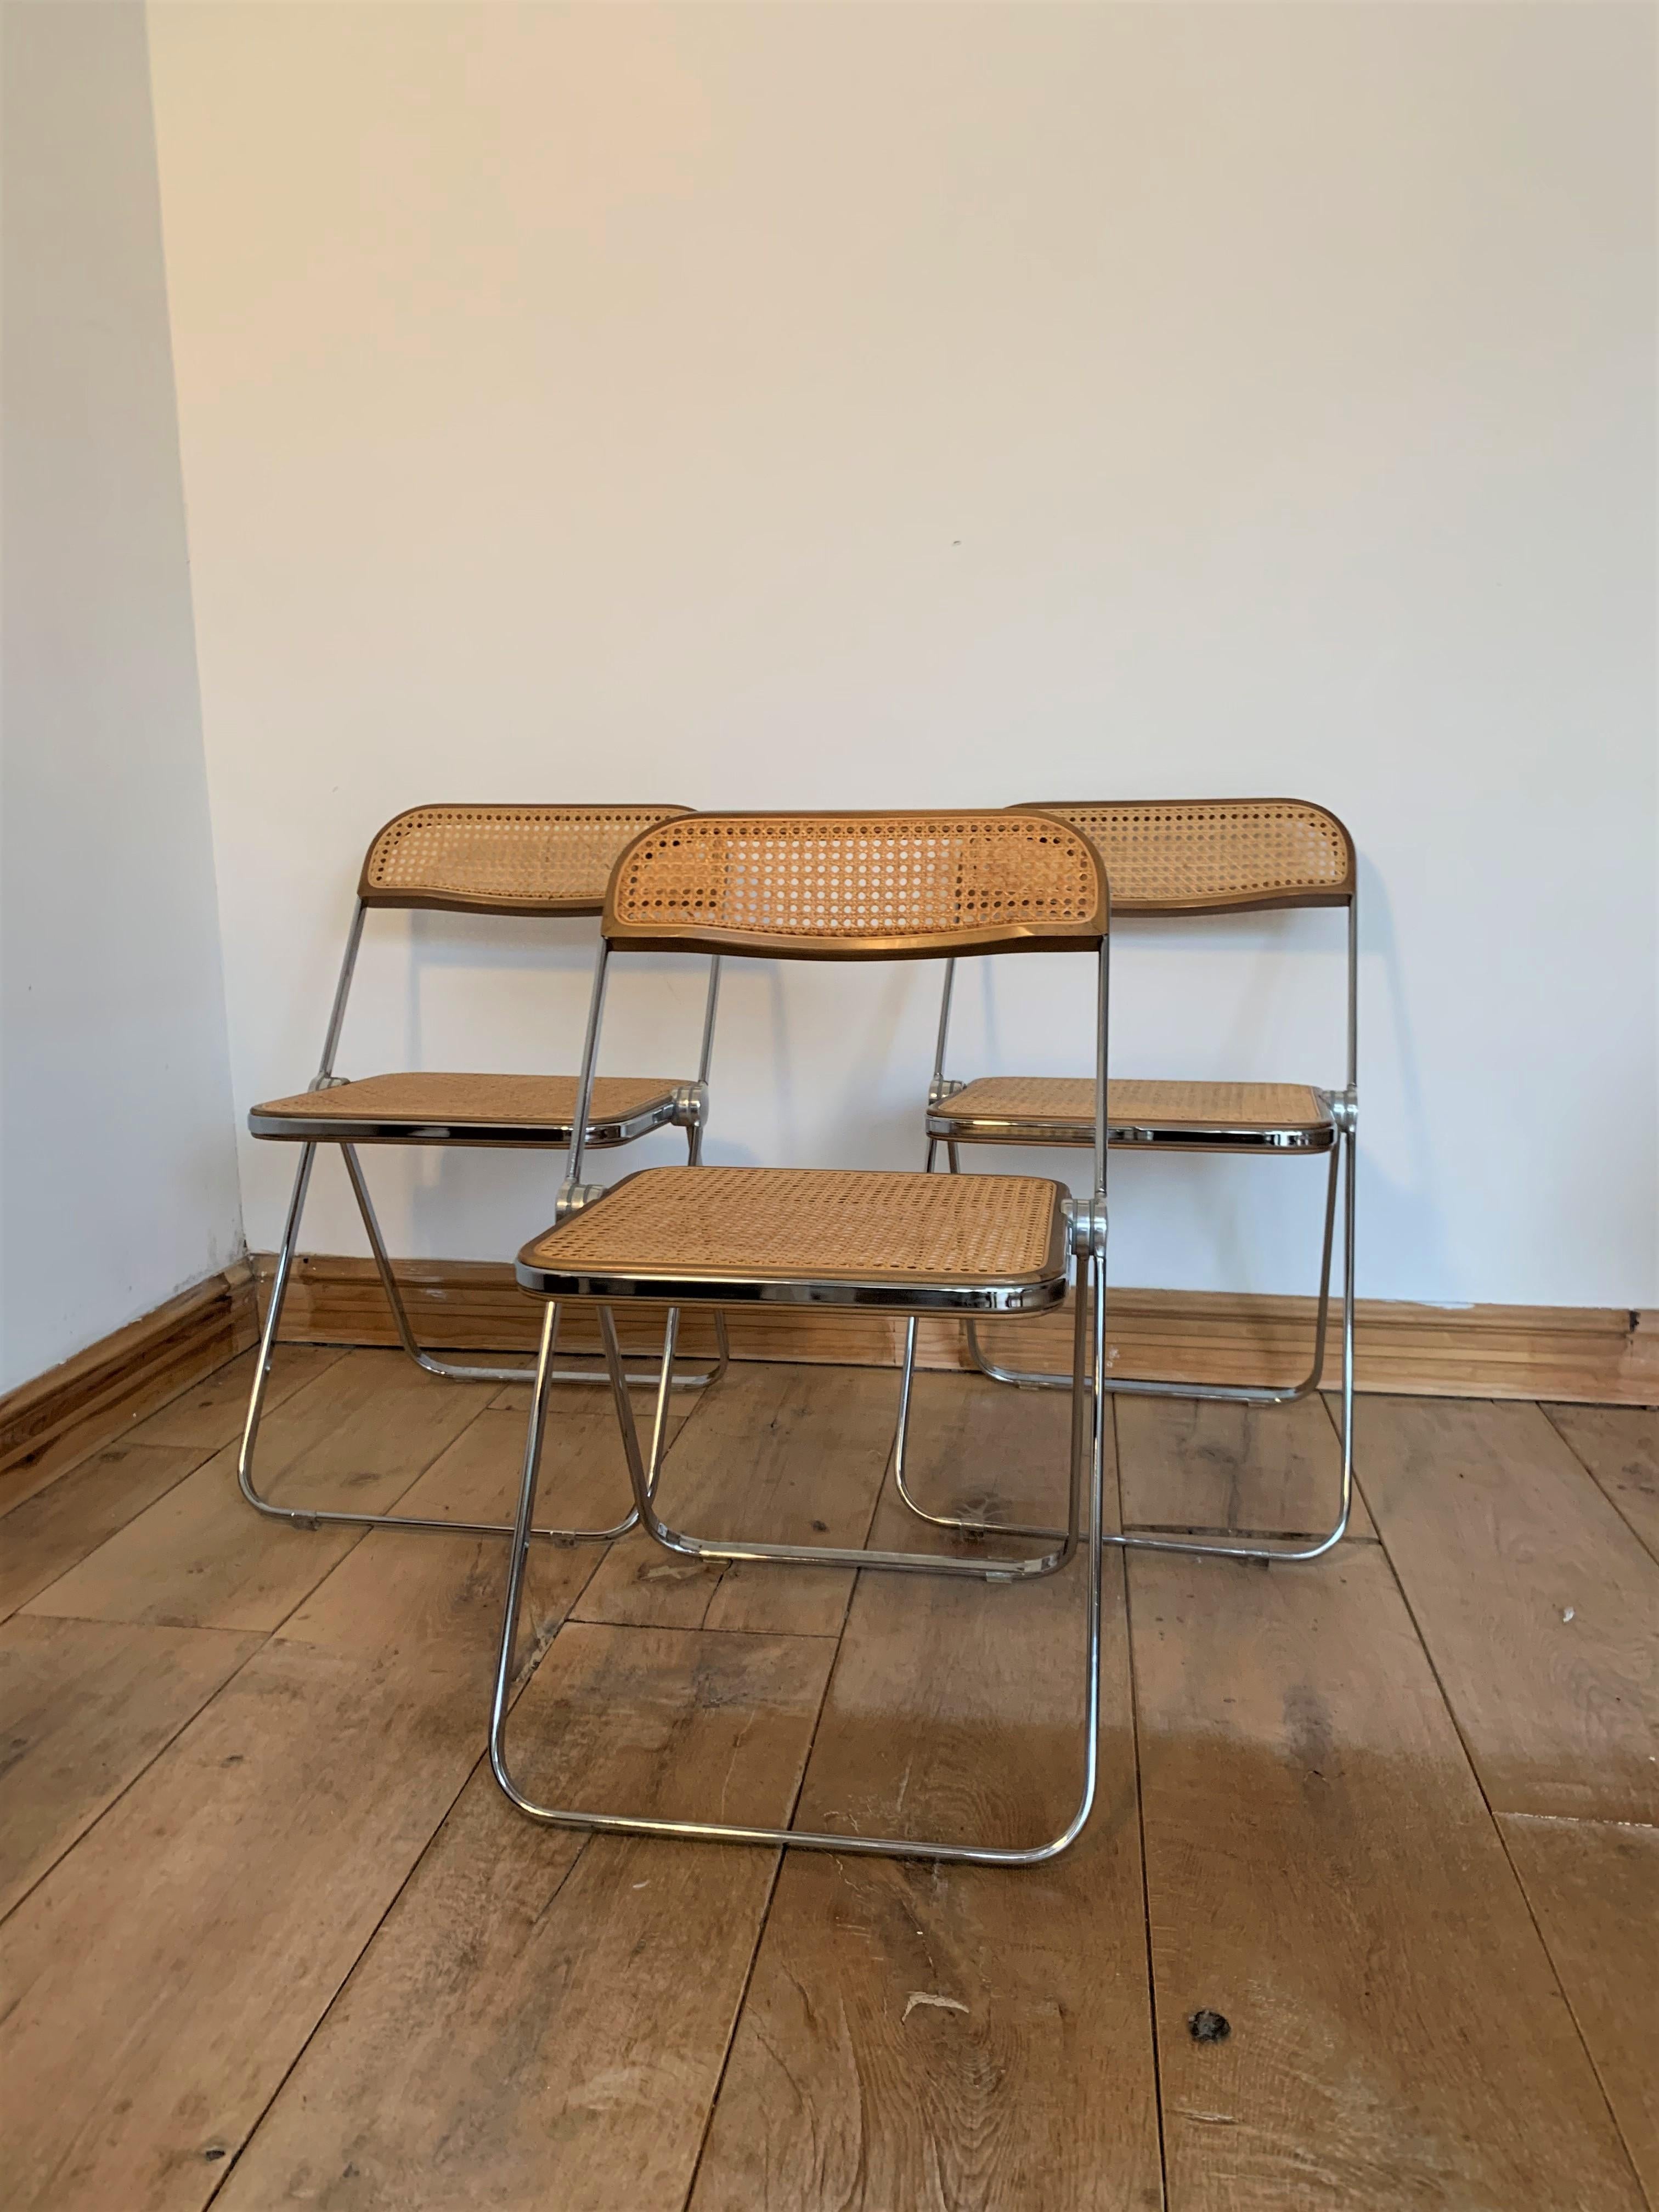 Original vintage Plia chairs designed by Giancarlo Piretti for Castelli in 1967. These folding chairs are made of rattan and chrome or wood frame. They are used with signs of wear due to age but still in very good condition. The Plia folding chair